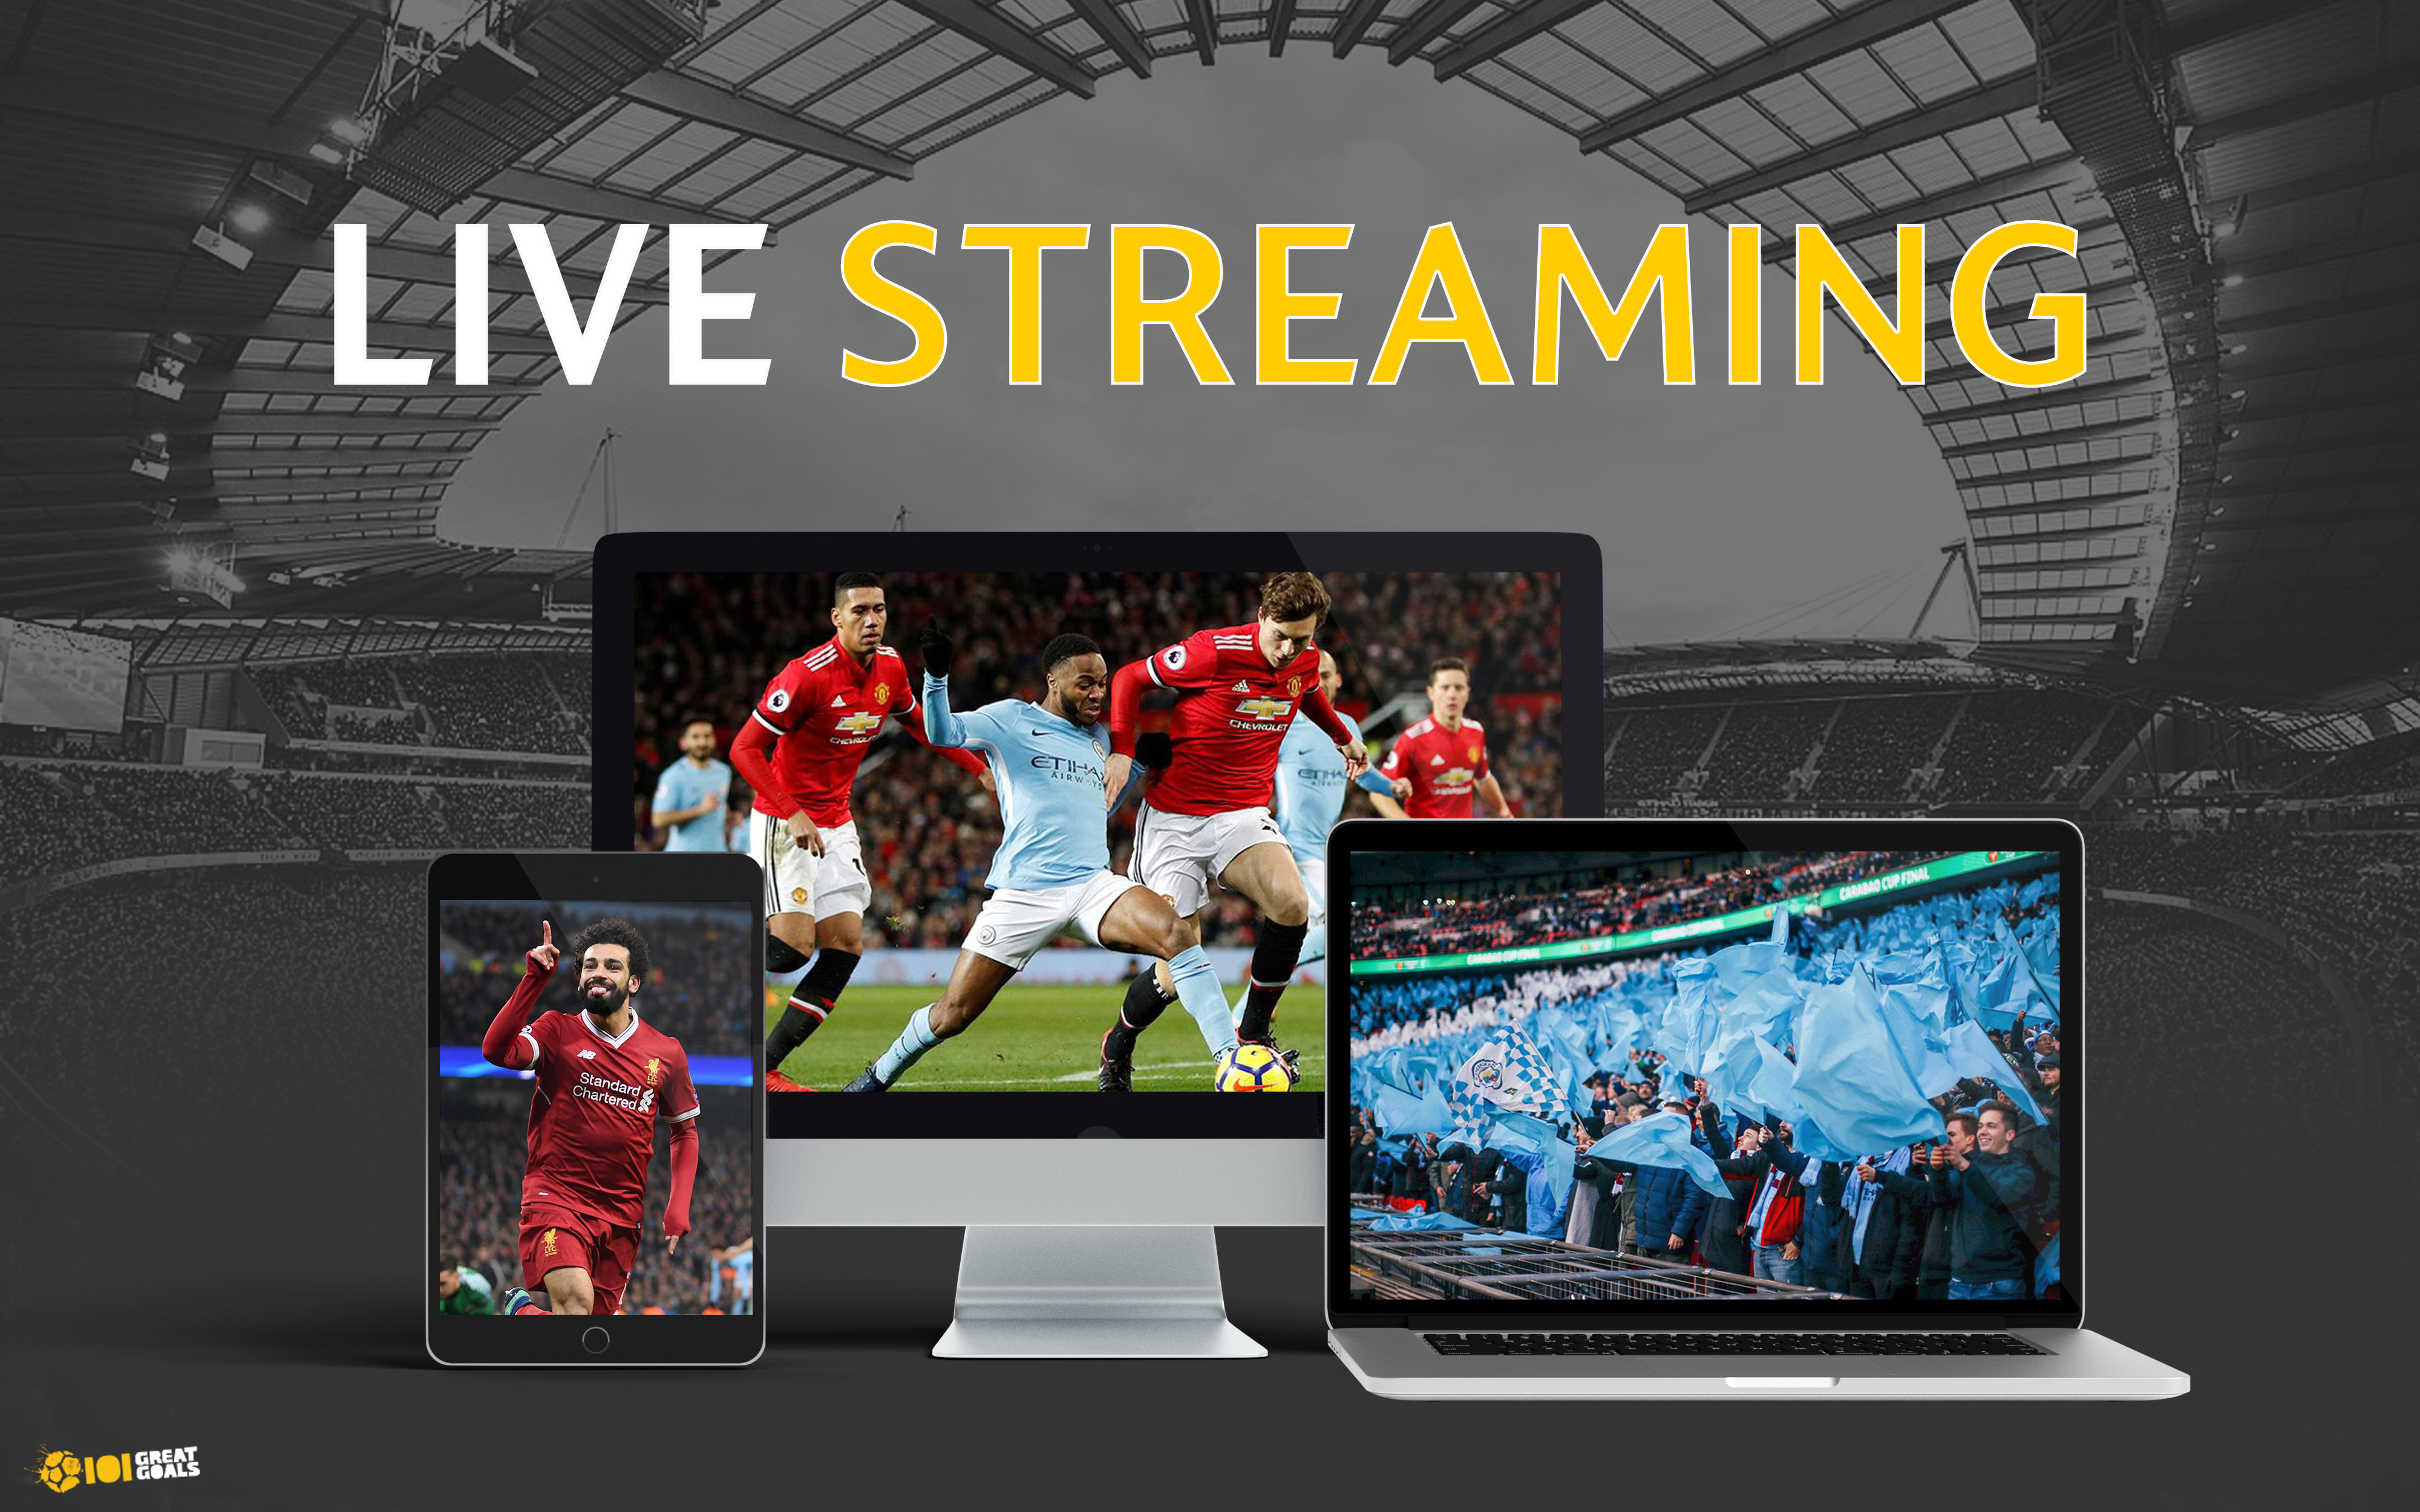 Football live streaming, watch soccer live streams La Liga, Serie A and more